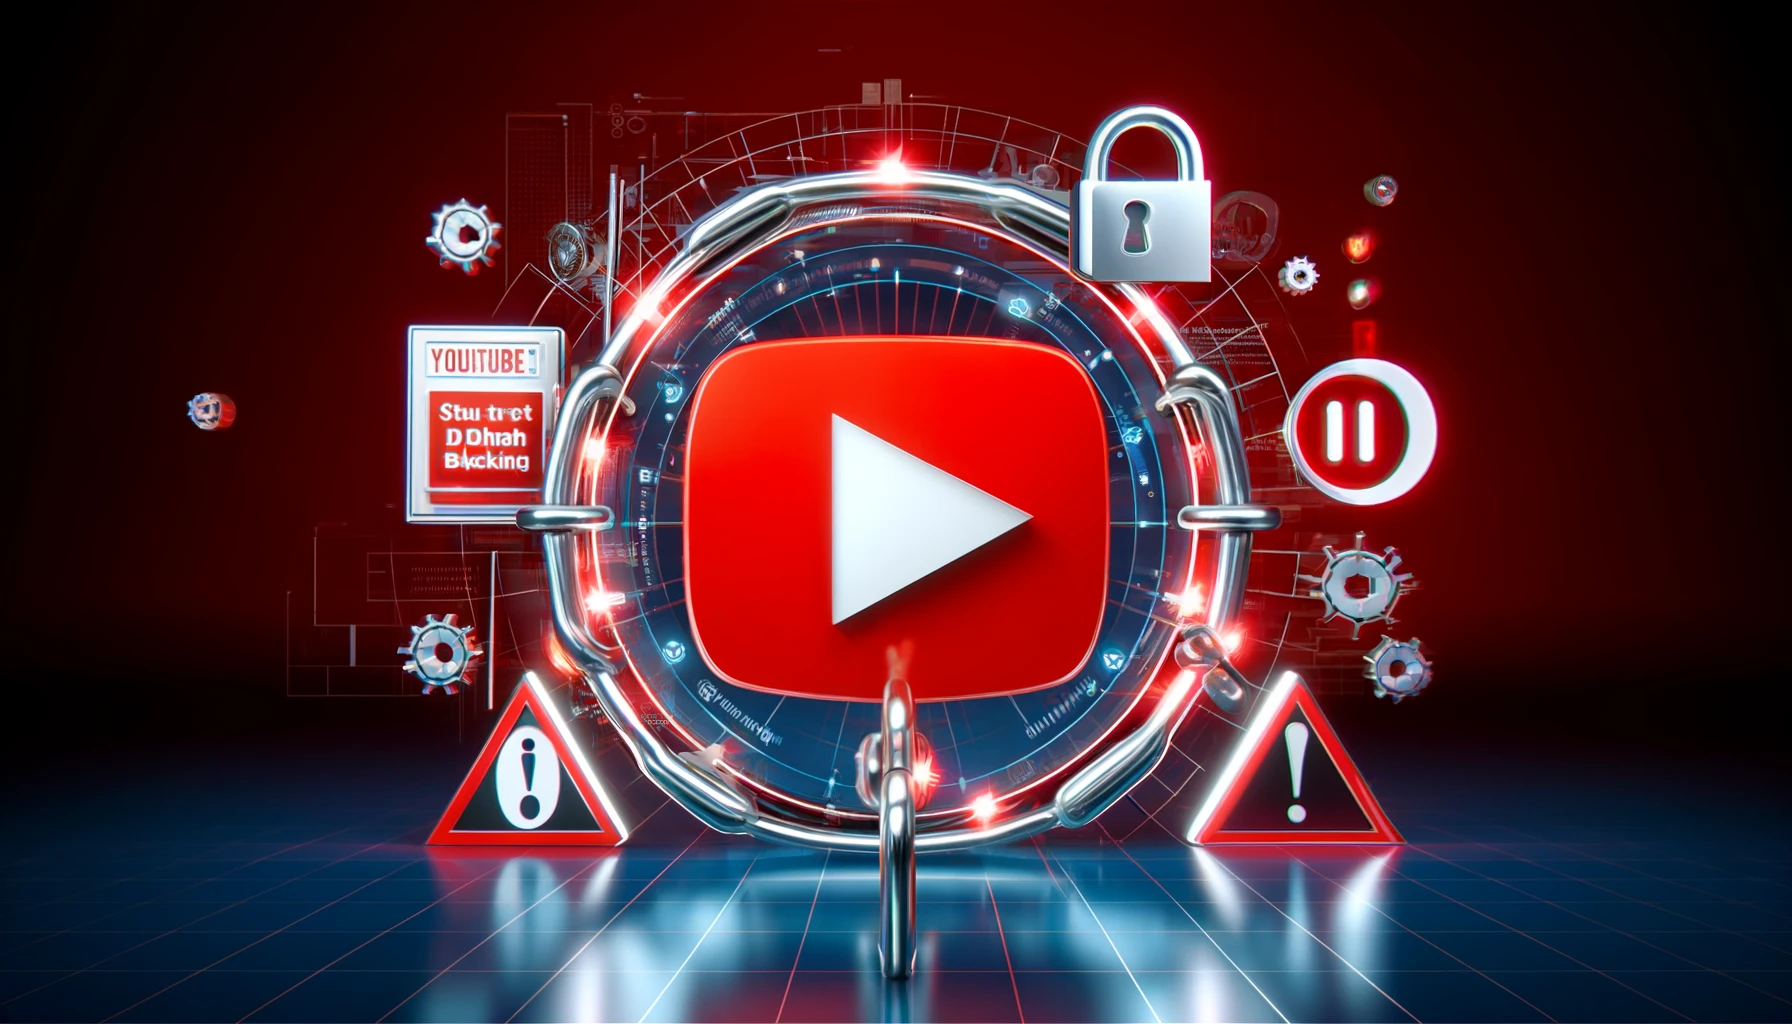 YouTube is cracking down on third-party apps that block ads